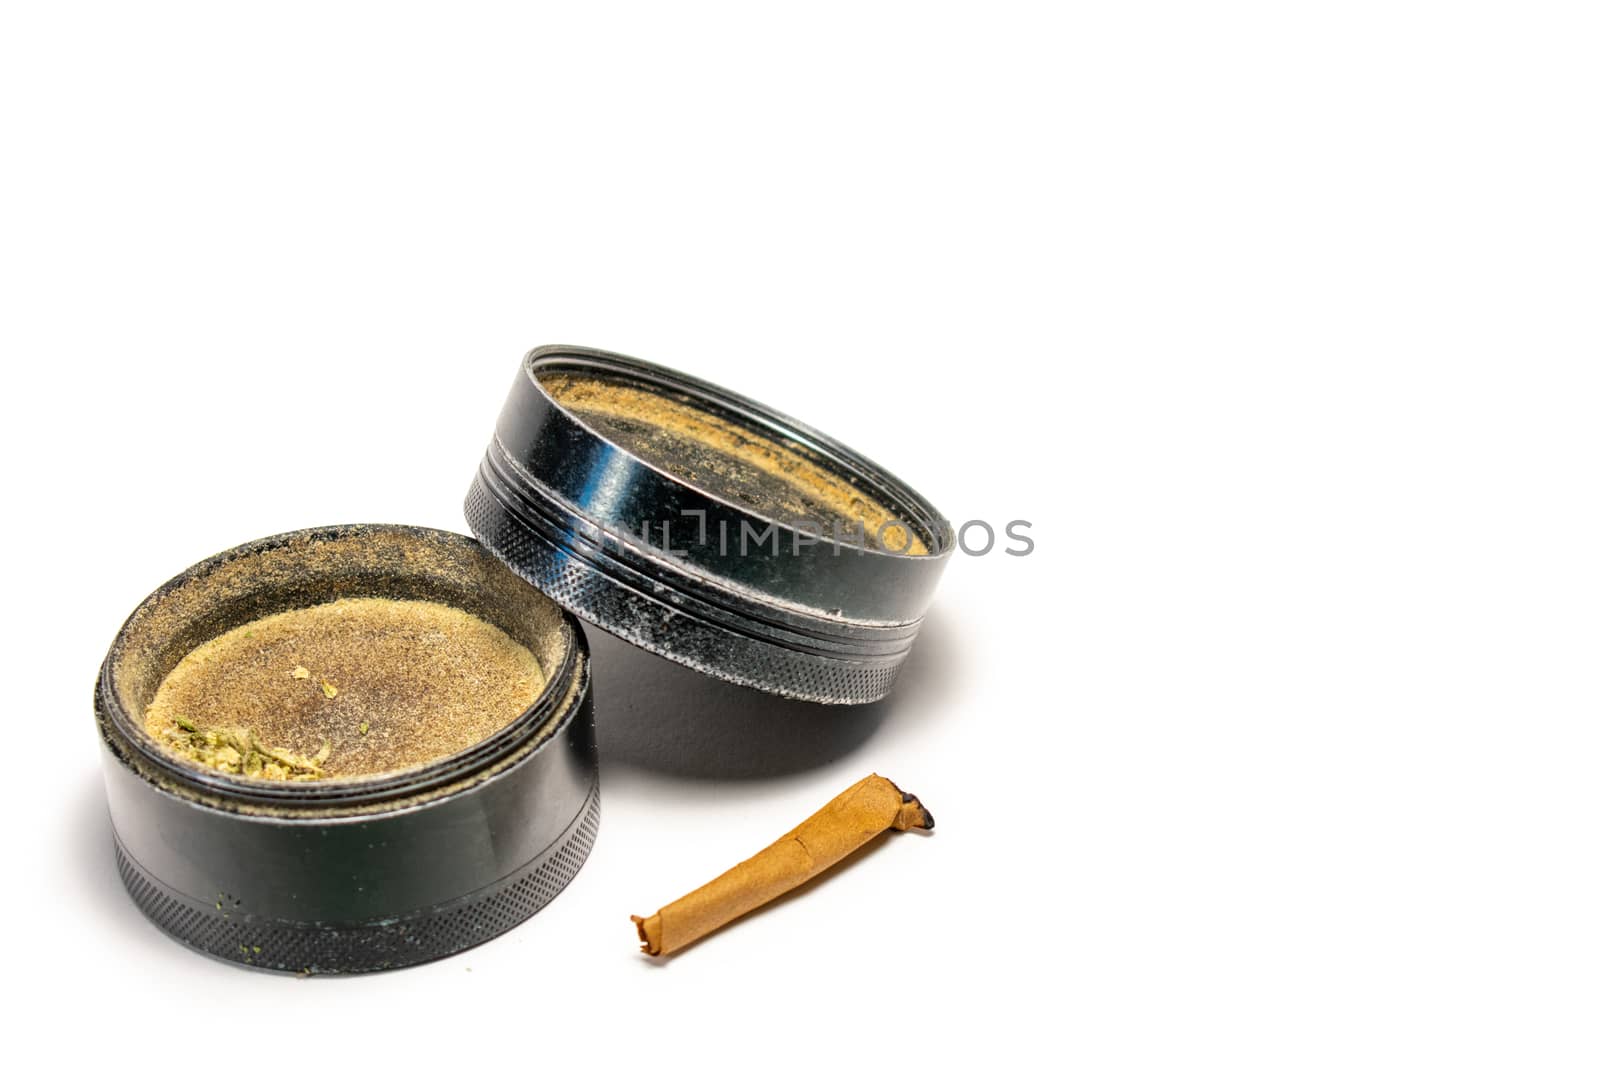 A Cannabis Grinder With the End of a Smoked Cannabis Cigar by bju12290